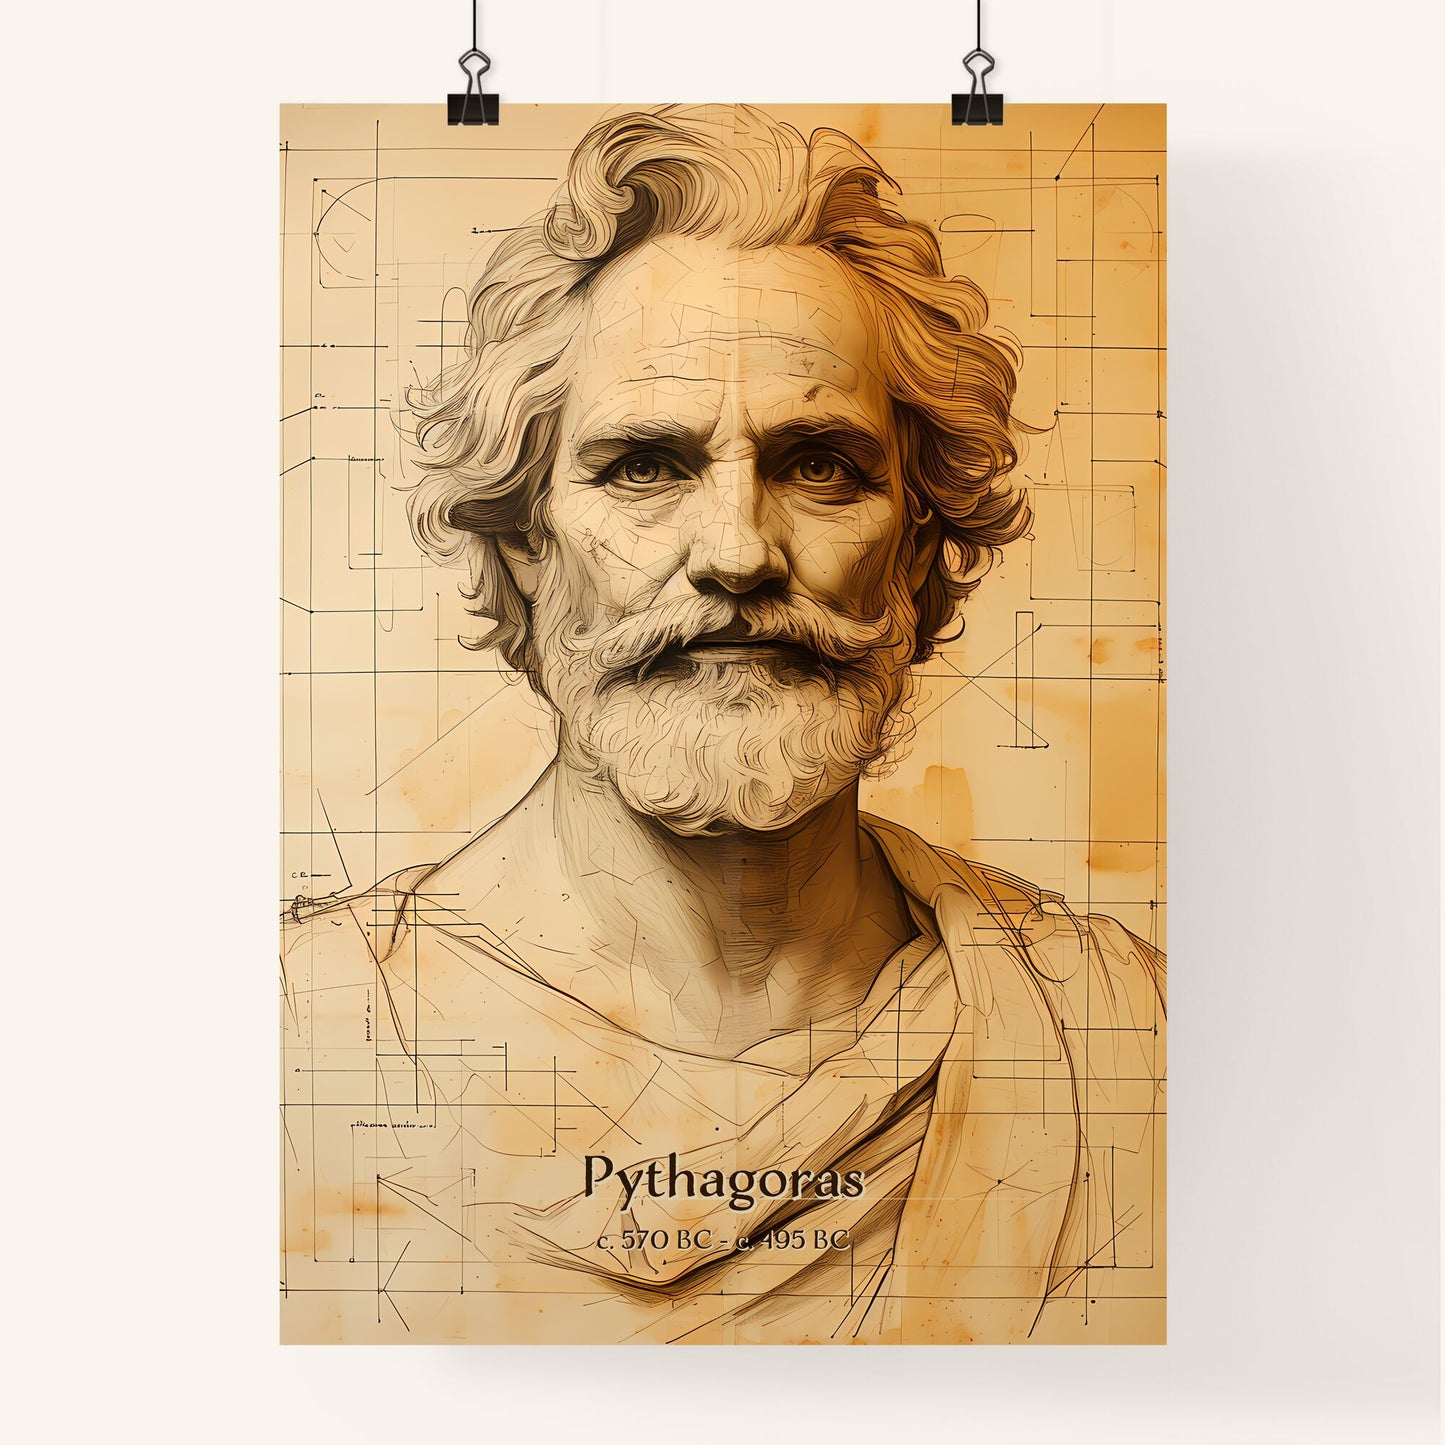 Pythagoras, c. 570 BC - c. 495 BC, A Poster of a drawing of a man Default Title